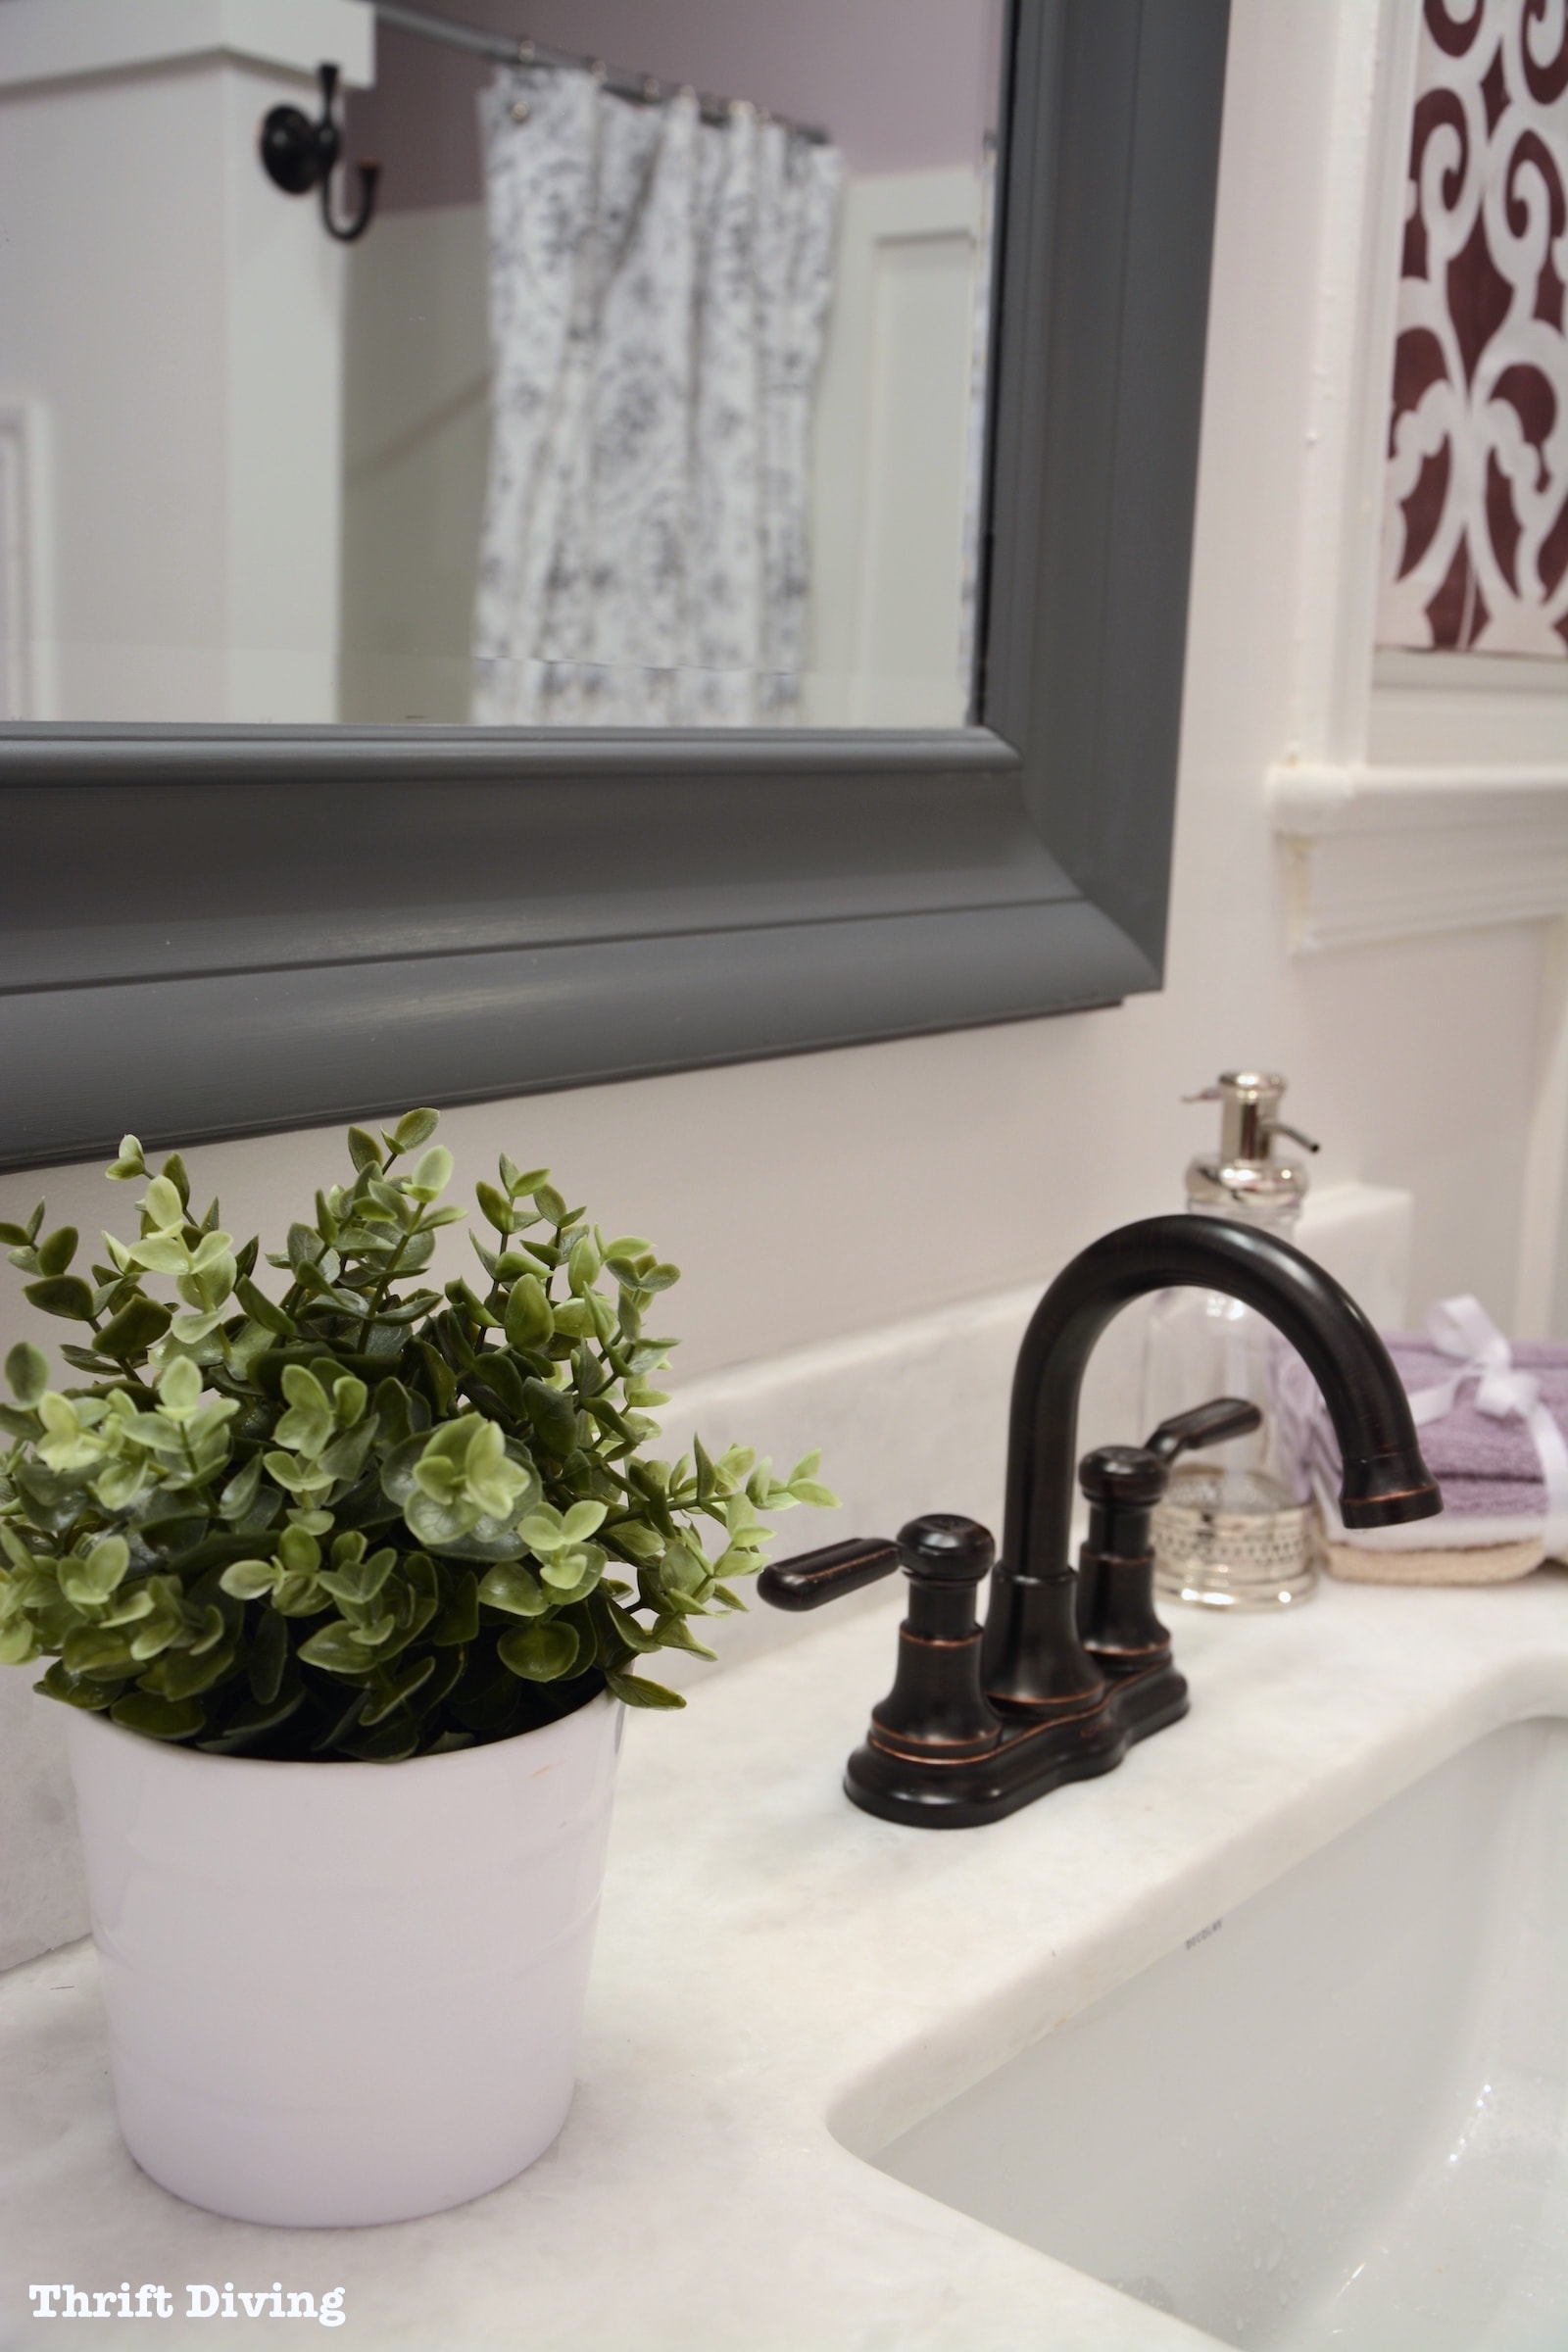 Lavender bathroom makeover - New faucets and painted bathroom mirror. - Thrift Diving